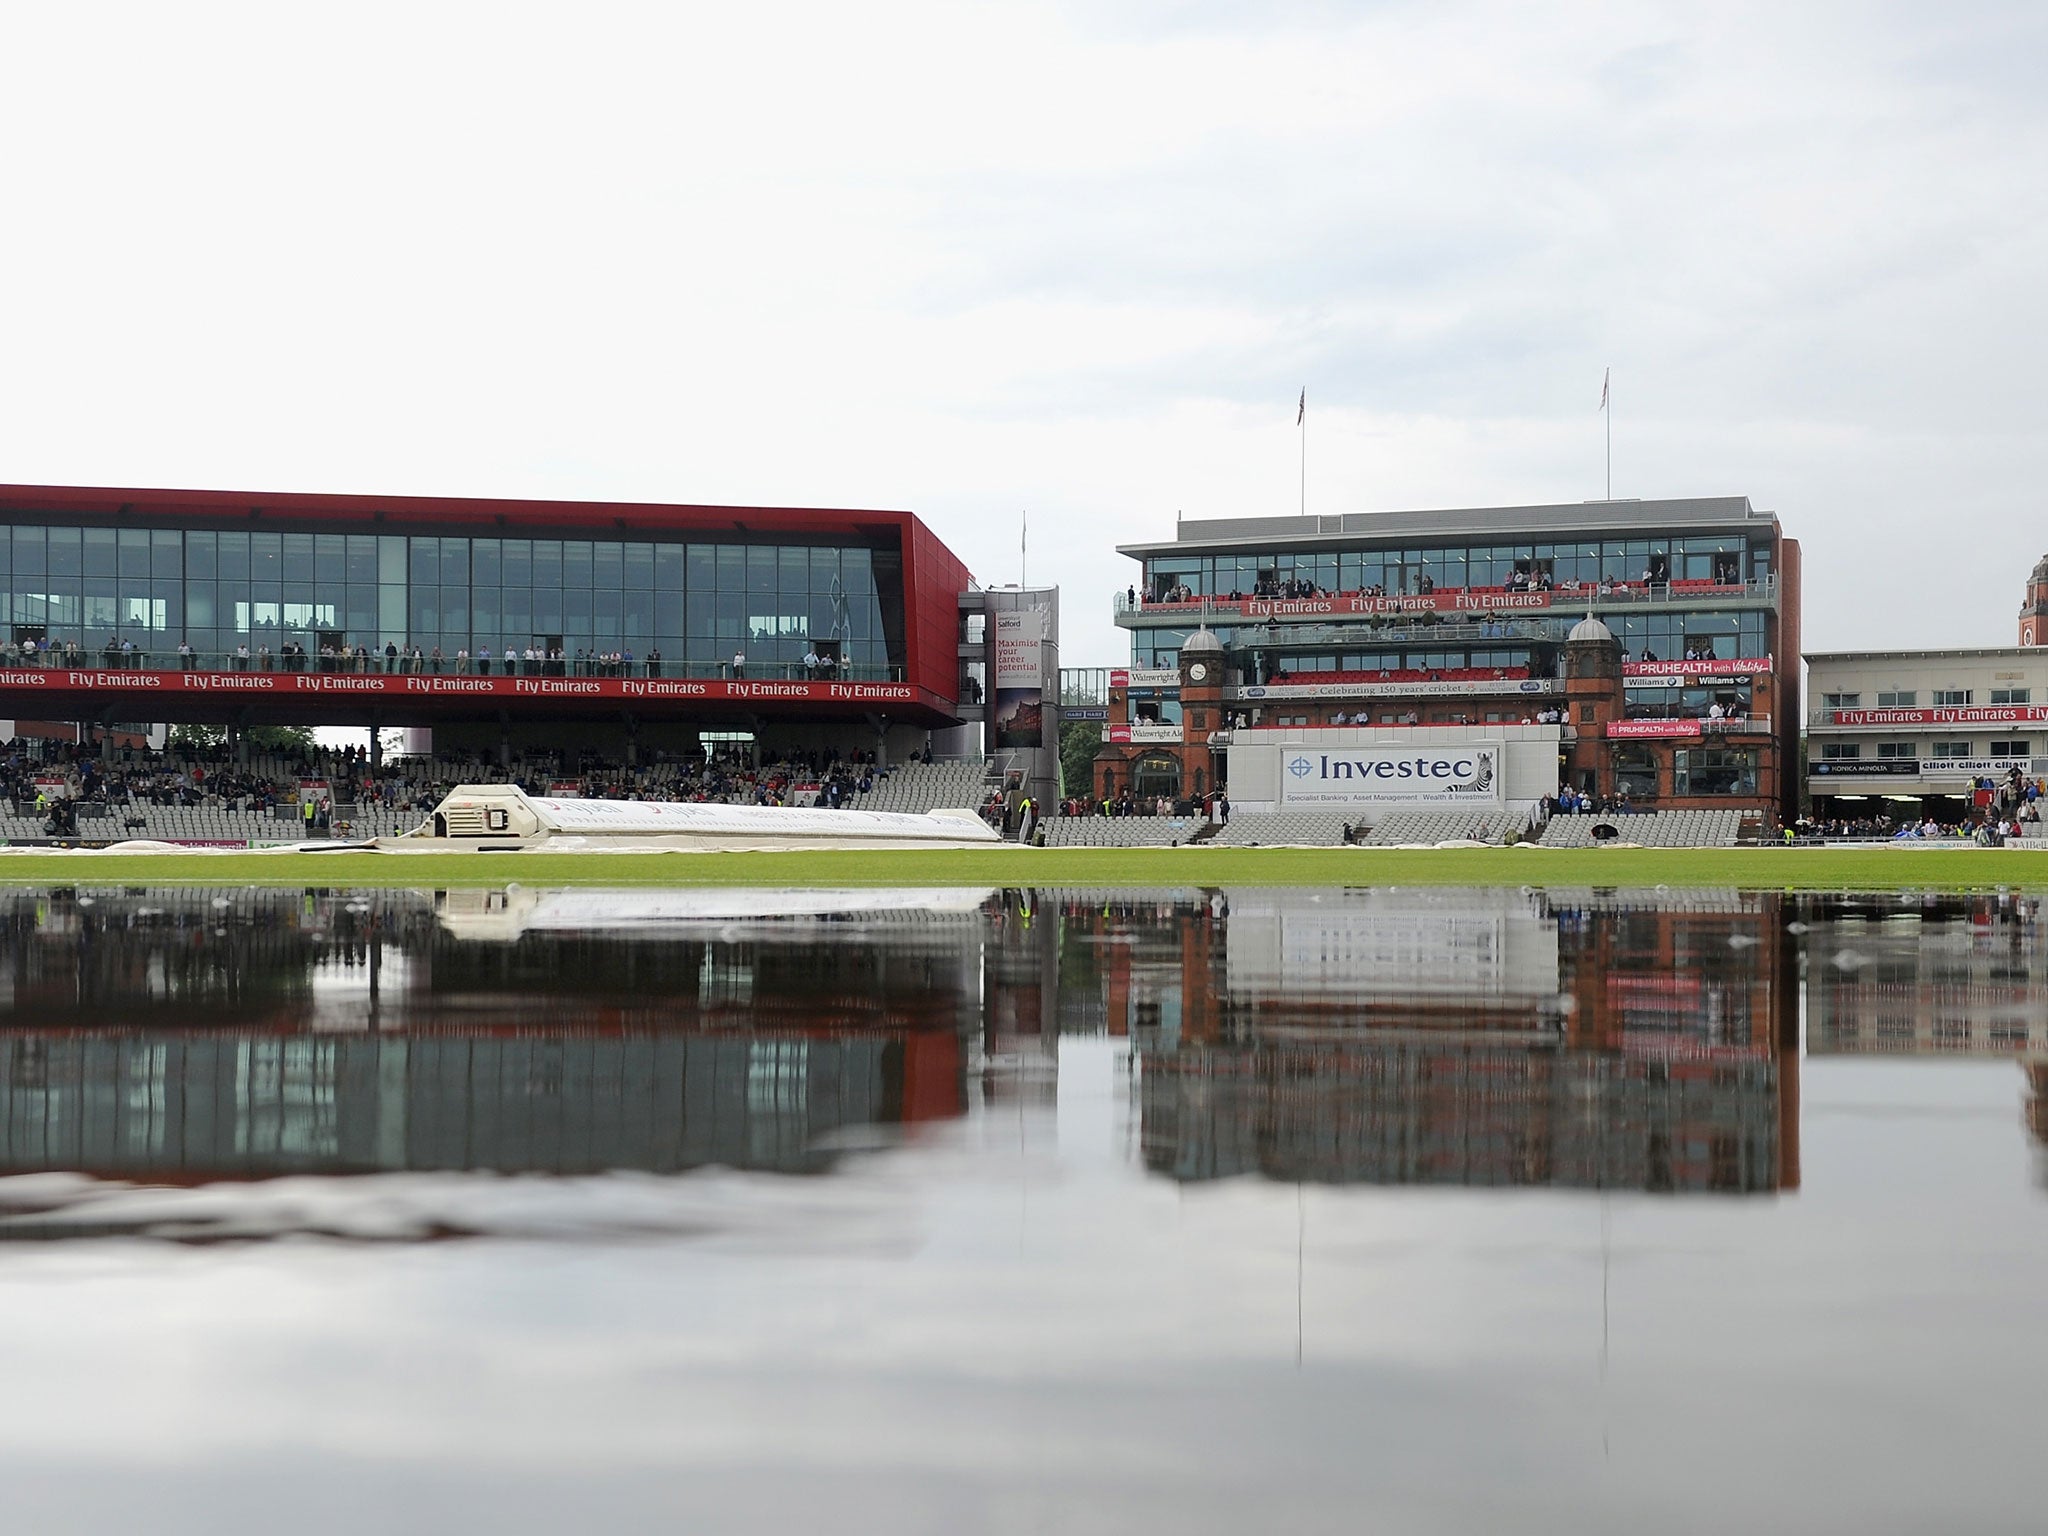 PLay was abandoned on day two at Old Trafford due to rain